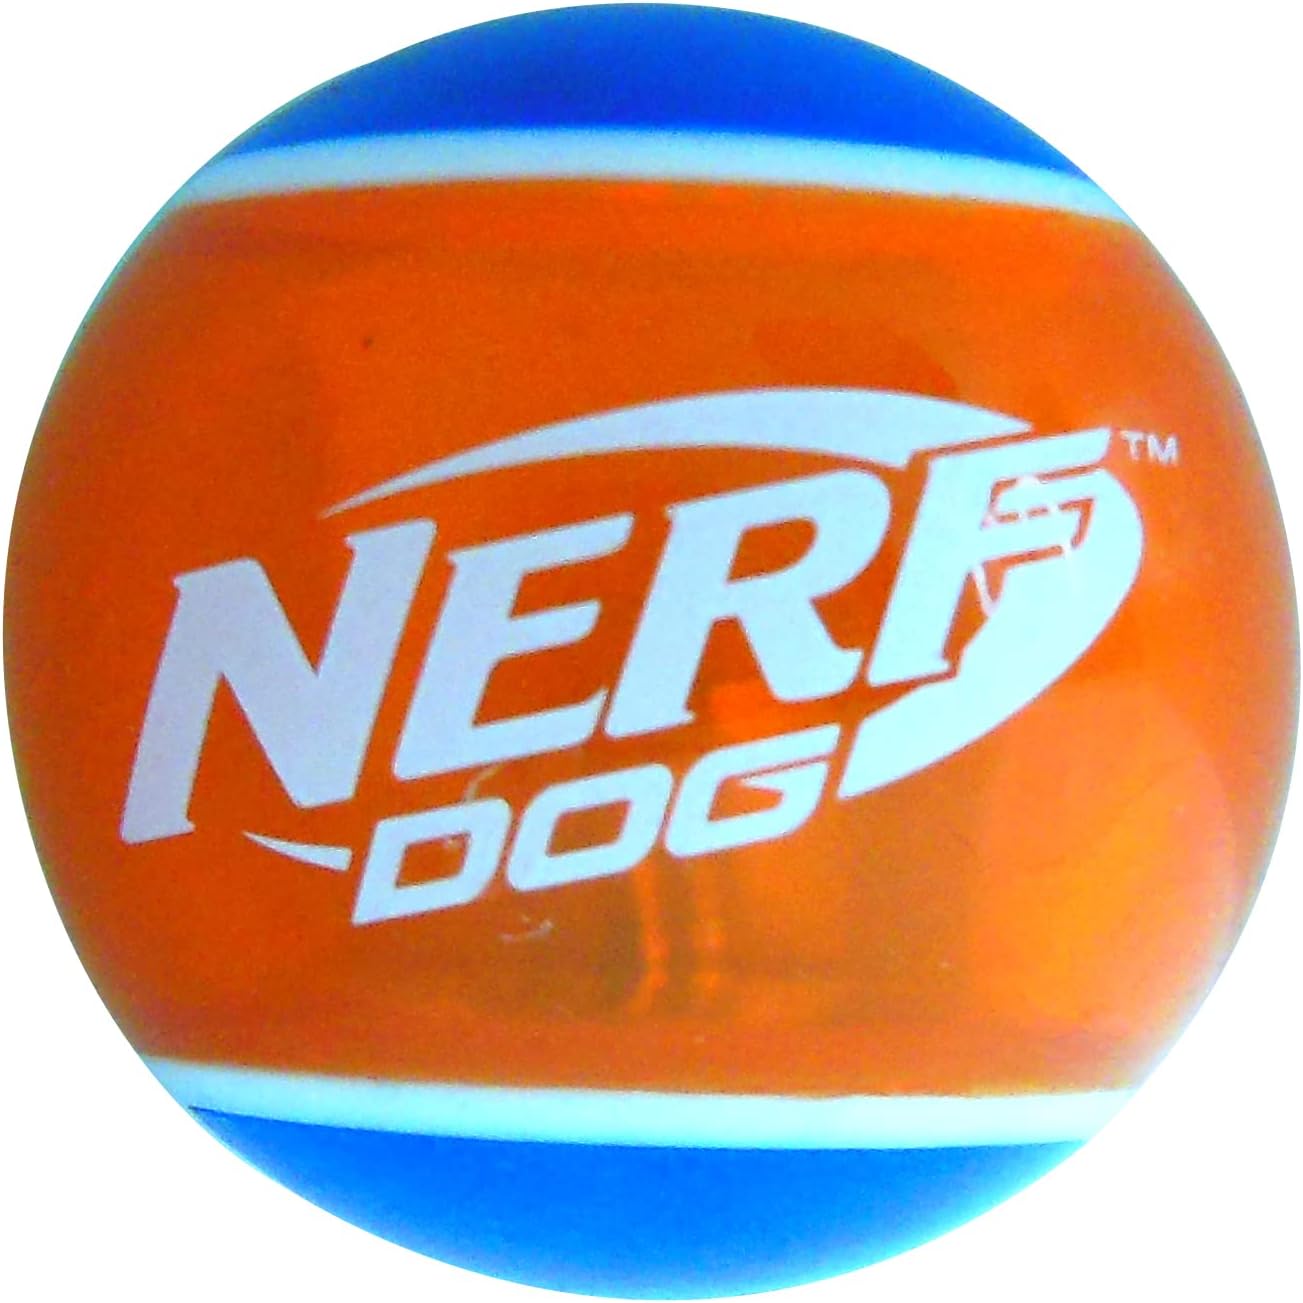 Nerf Puppy & Small Dog TPR Ball Dog Toy  Dog Toys  | PetMax Canada